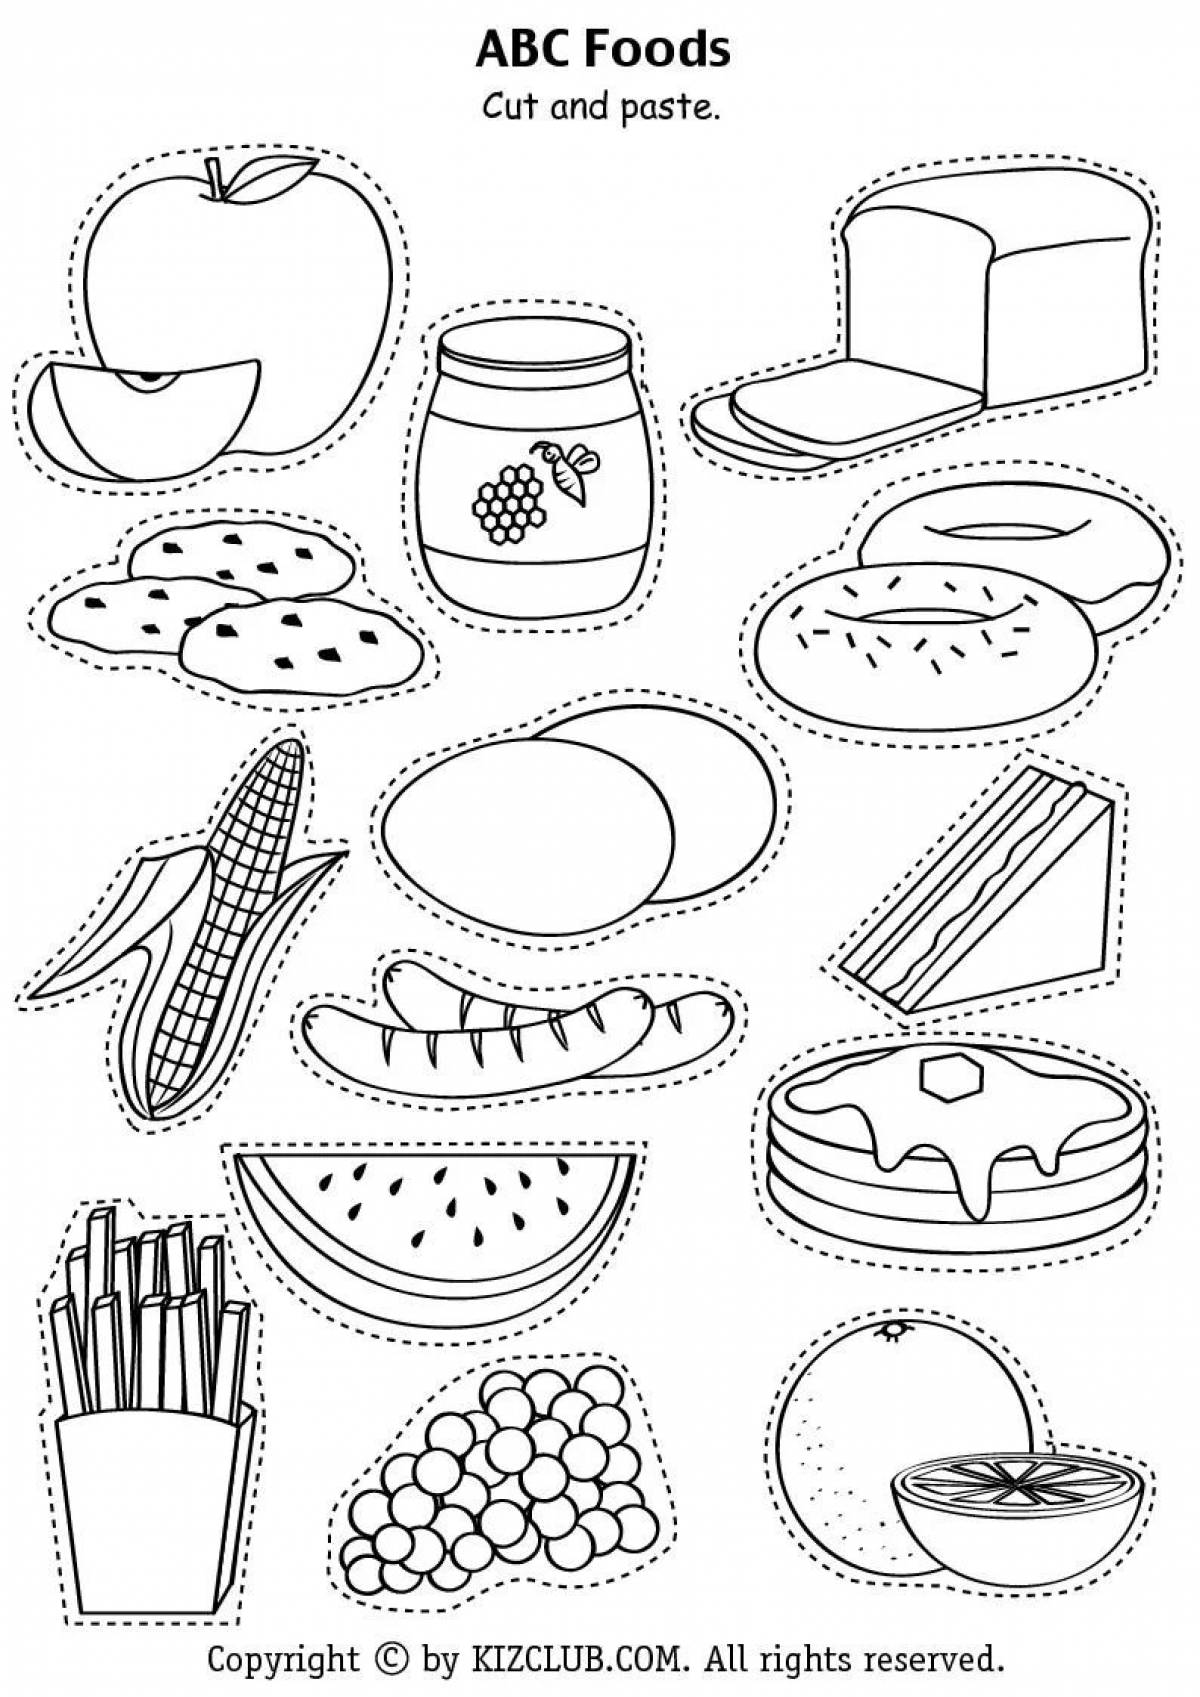 Charming food coloring page